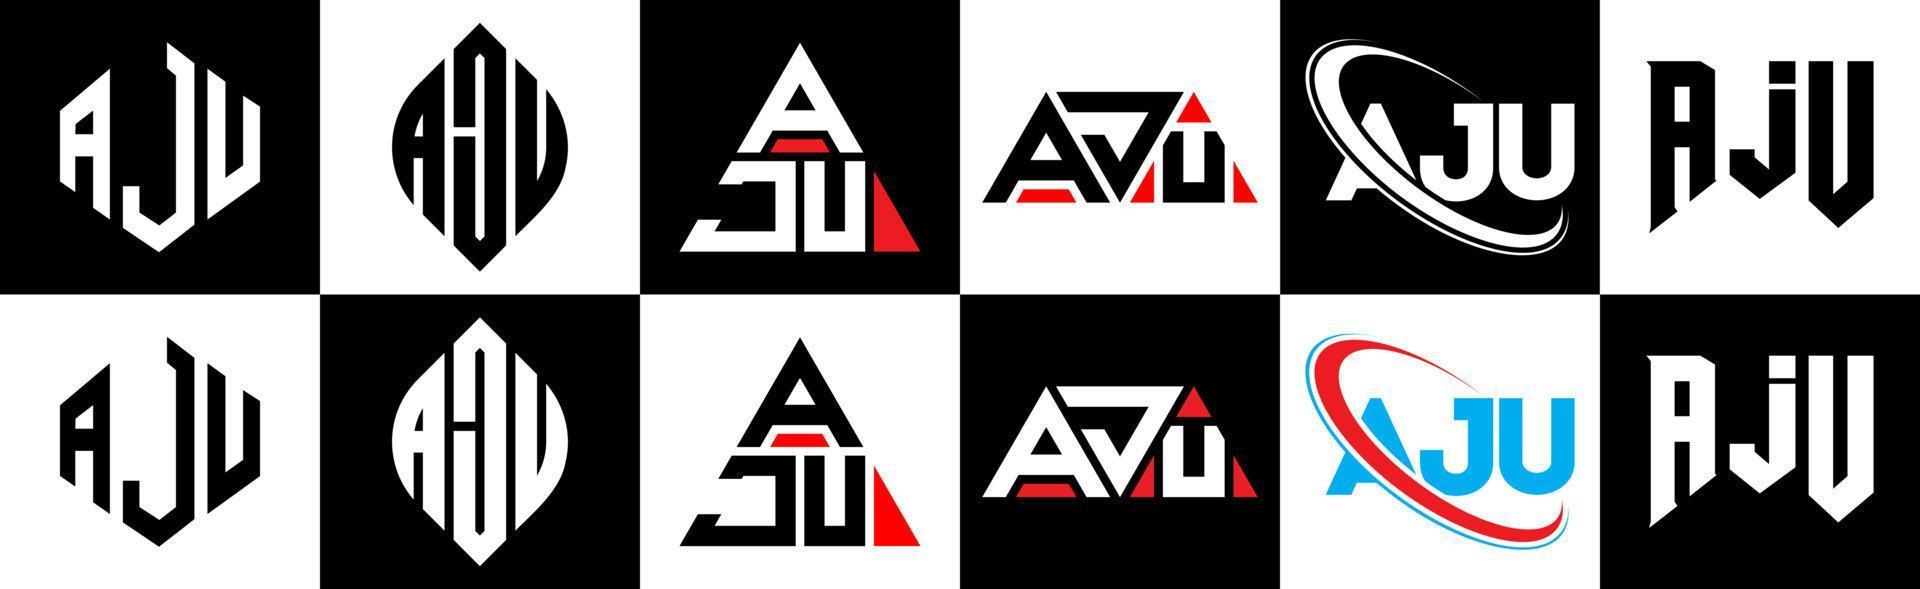 AJU letter logo design in six style. AJU polygon, circle, triangle, hexagon, flat and simple style with black and white color variation letter logo set in one artboard. AJU minimalist and classic logo vector